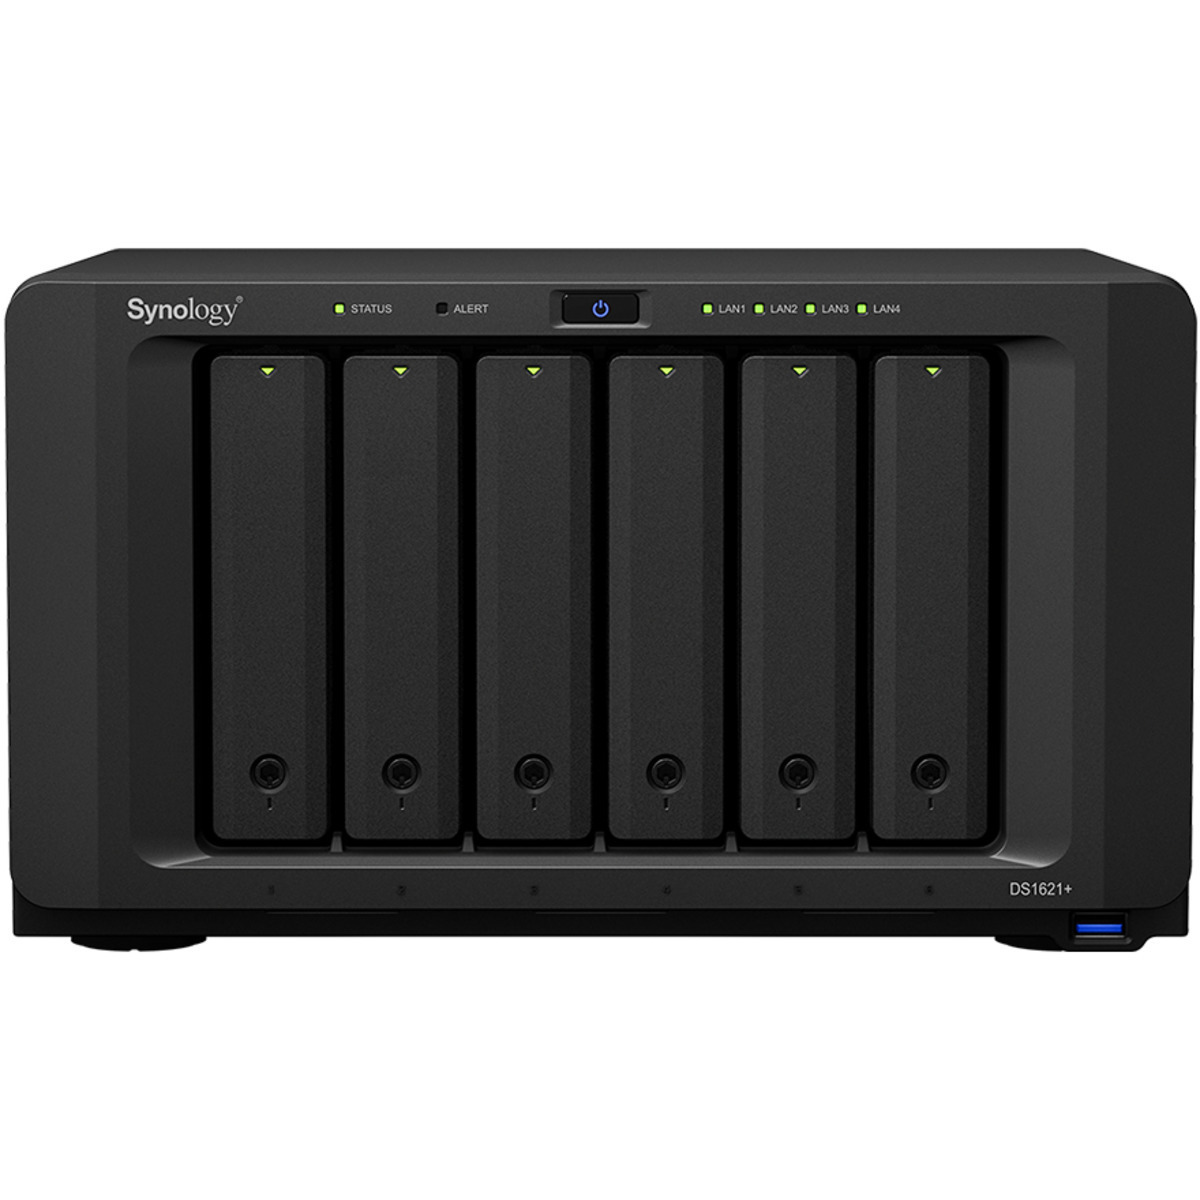 Synology DiskStation DS1621+ 72tb 6-Bay Desktop Multimedia / Power User / Business NAS - Network Attached Storage Device 6x12tb Seagate IronWolf Pro ST12000NT001 3.5 7200rpm SATA 6Gb/s HDD NAS Class Drives Installed - Burn-In Tested - ON SALE - FREE RAM UPGRADE DiskStation DS1621+